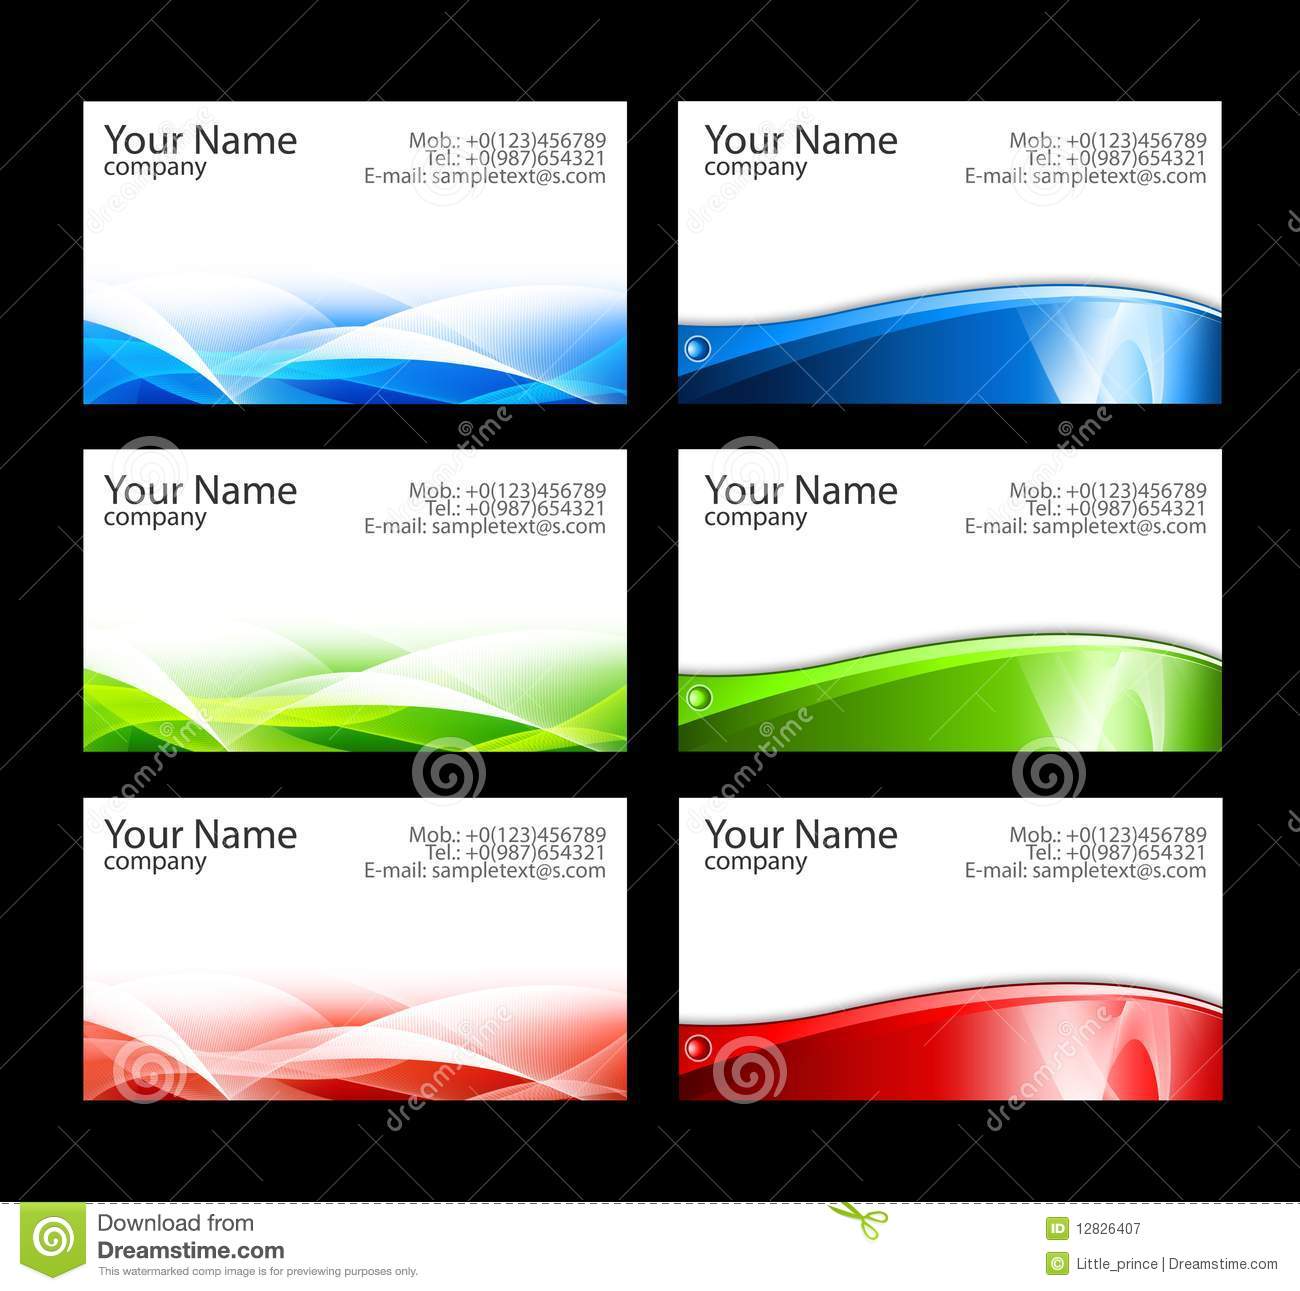 Word 23 Business Card Template